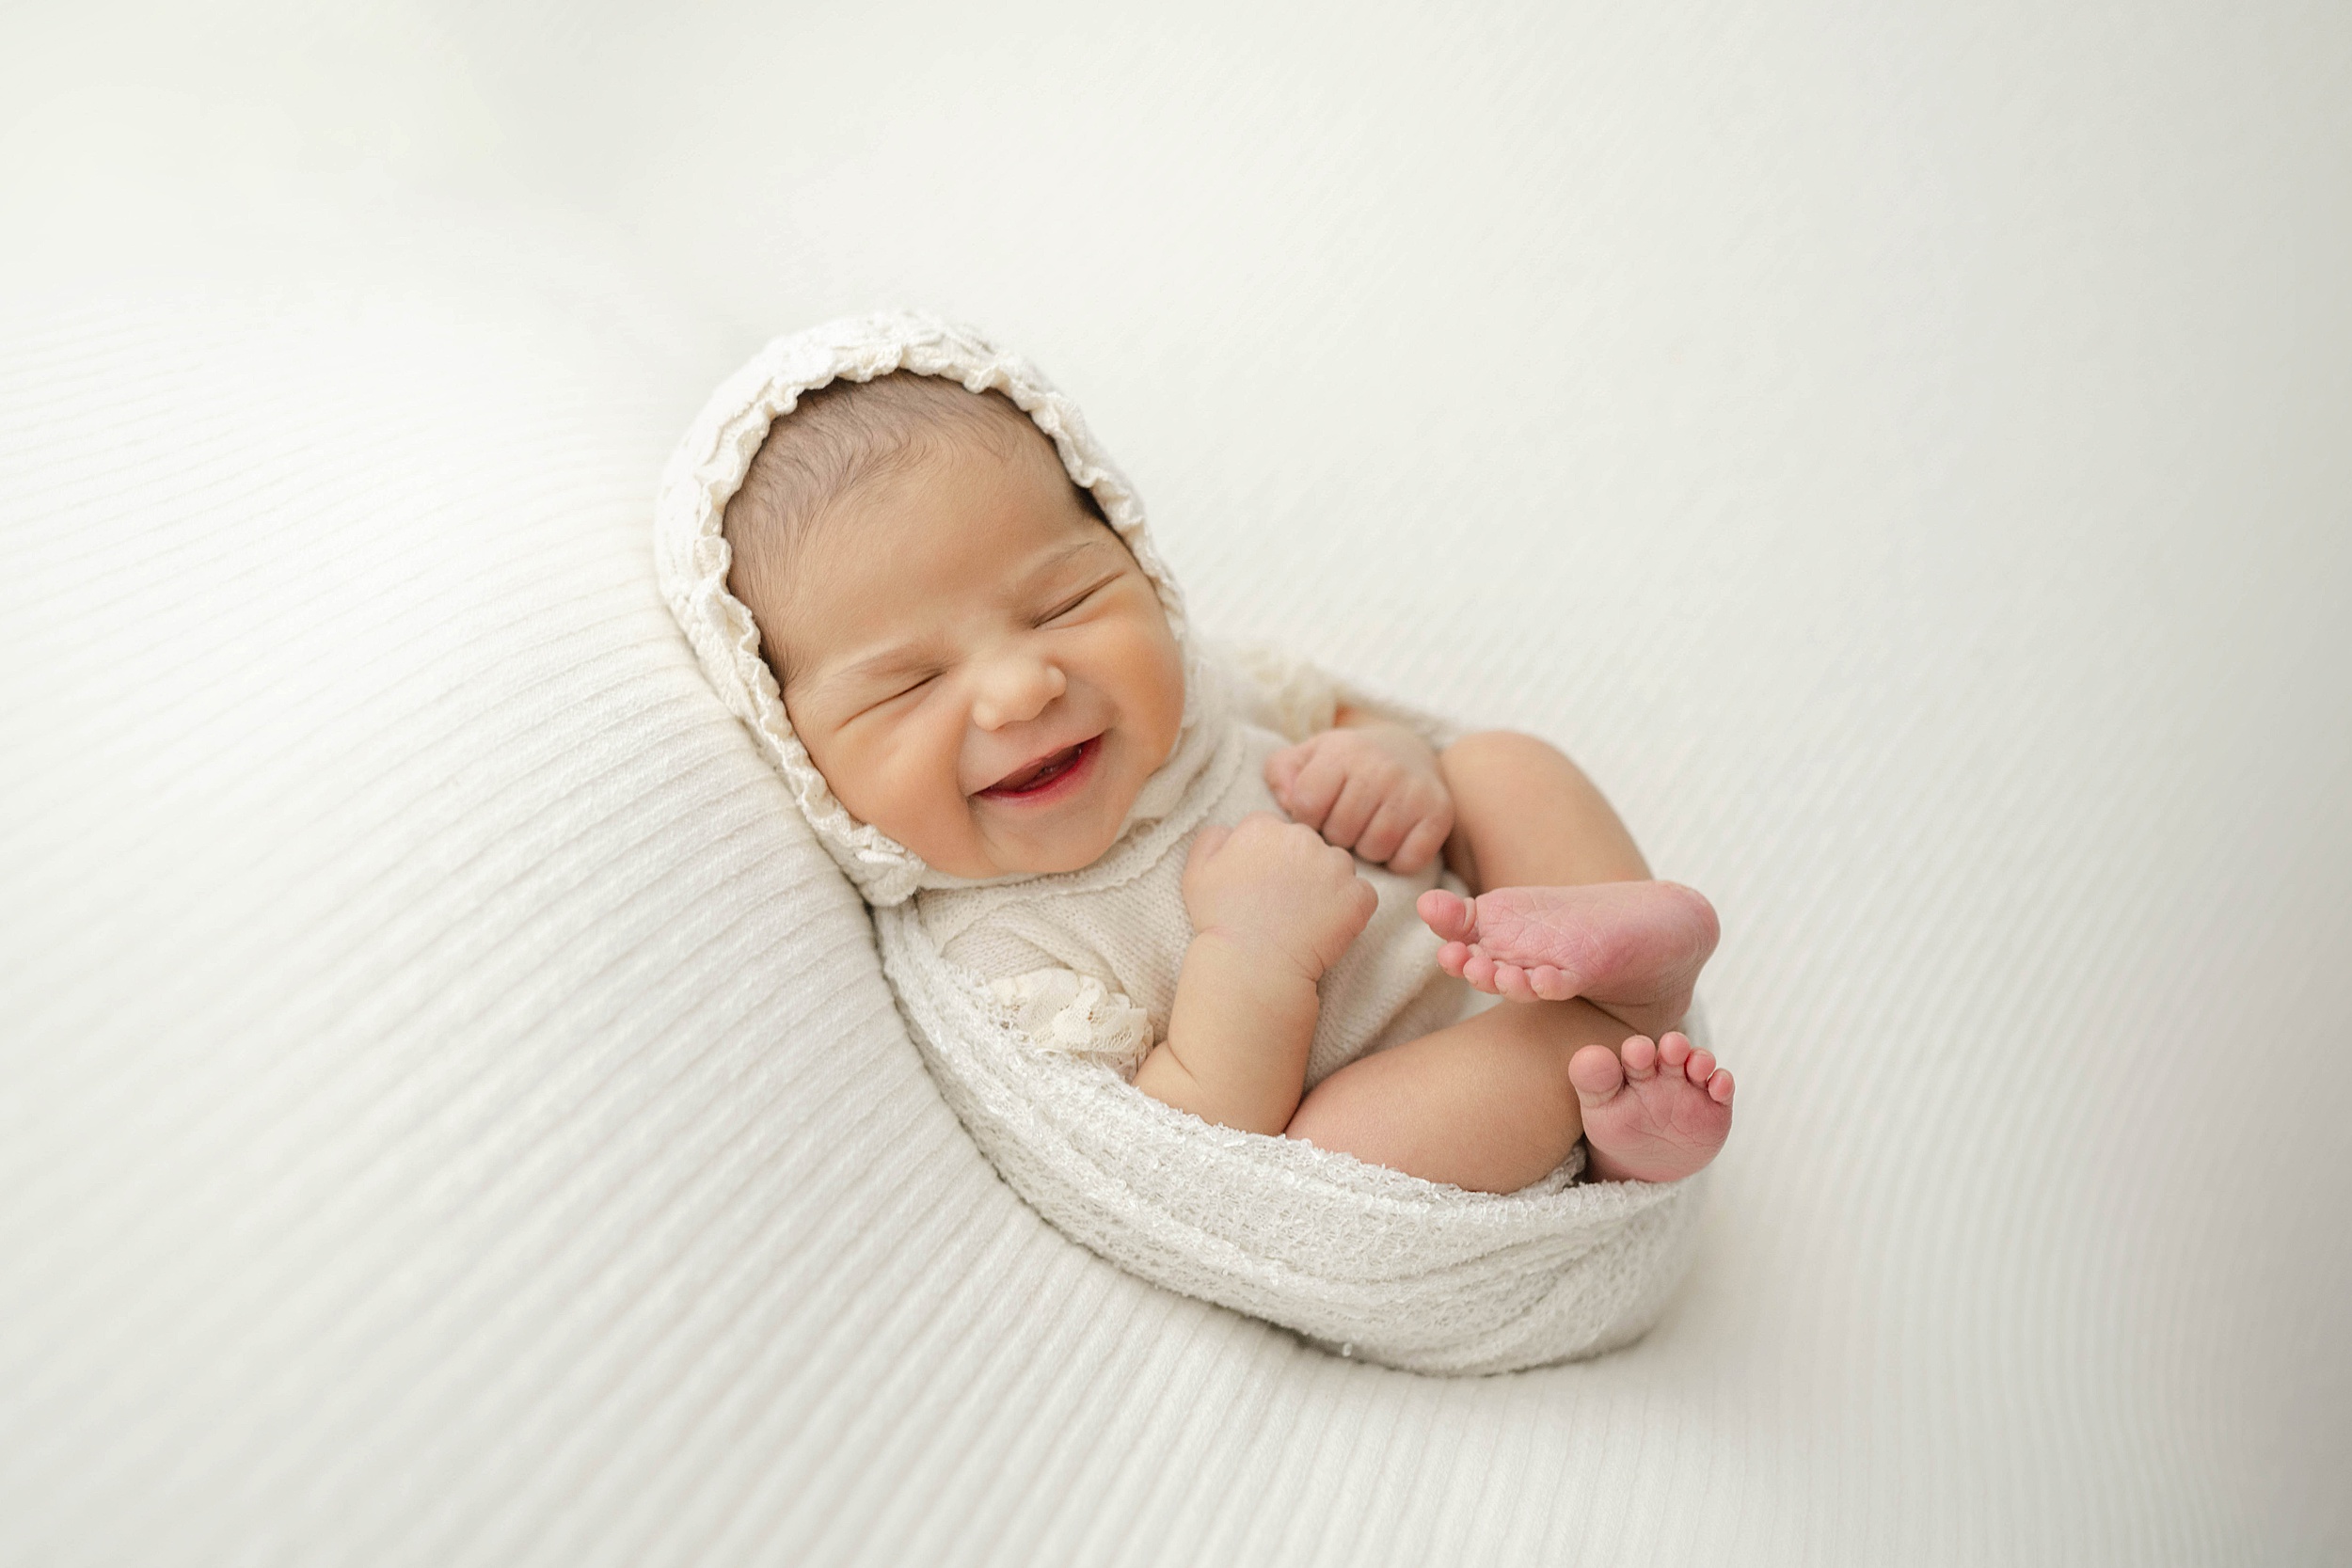 A newborn baby smiles in its sleep while wrapped in a cheesecloth swaddle and white bonnet